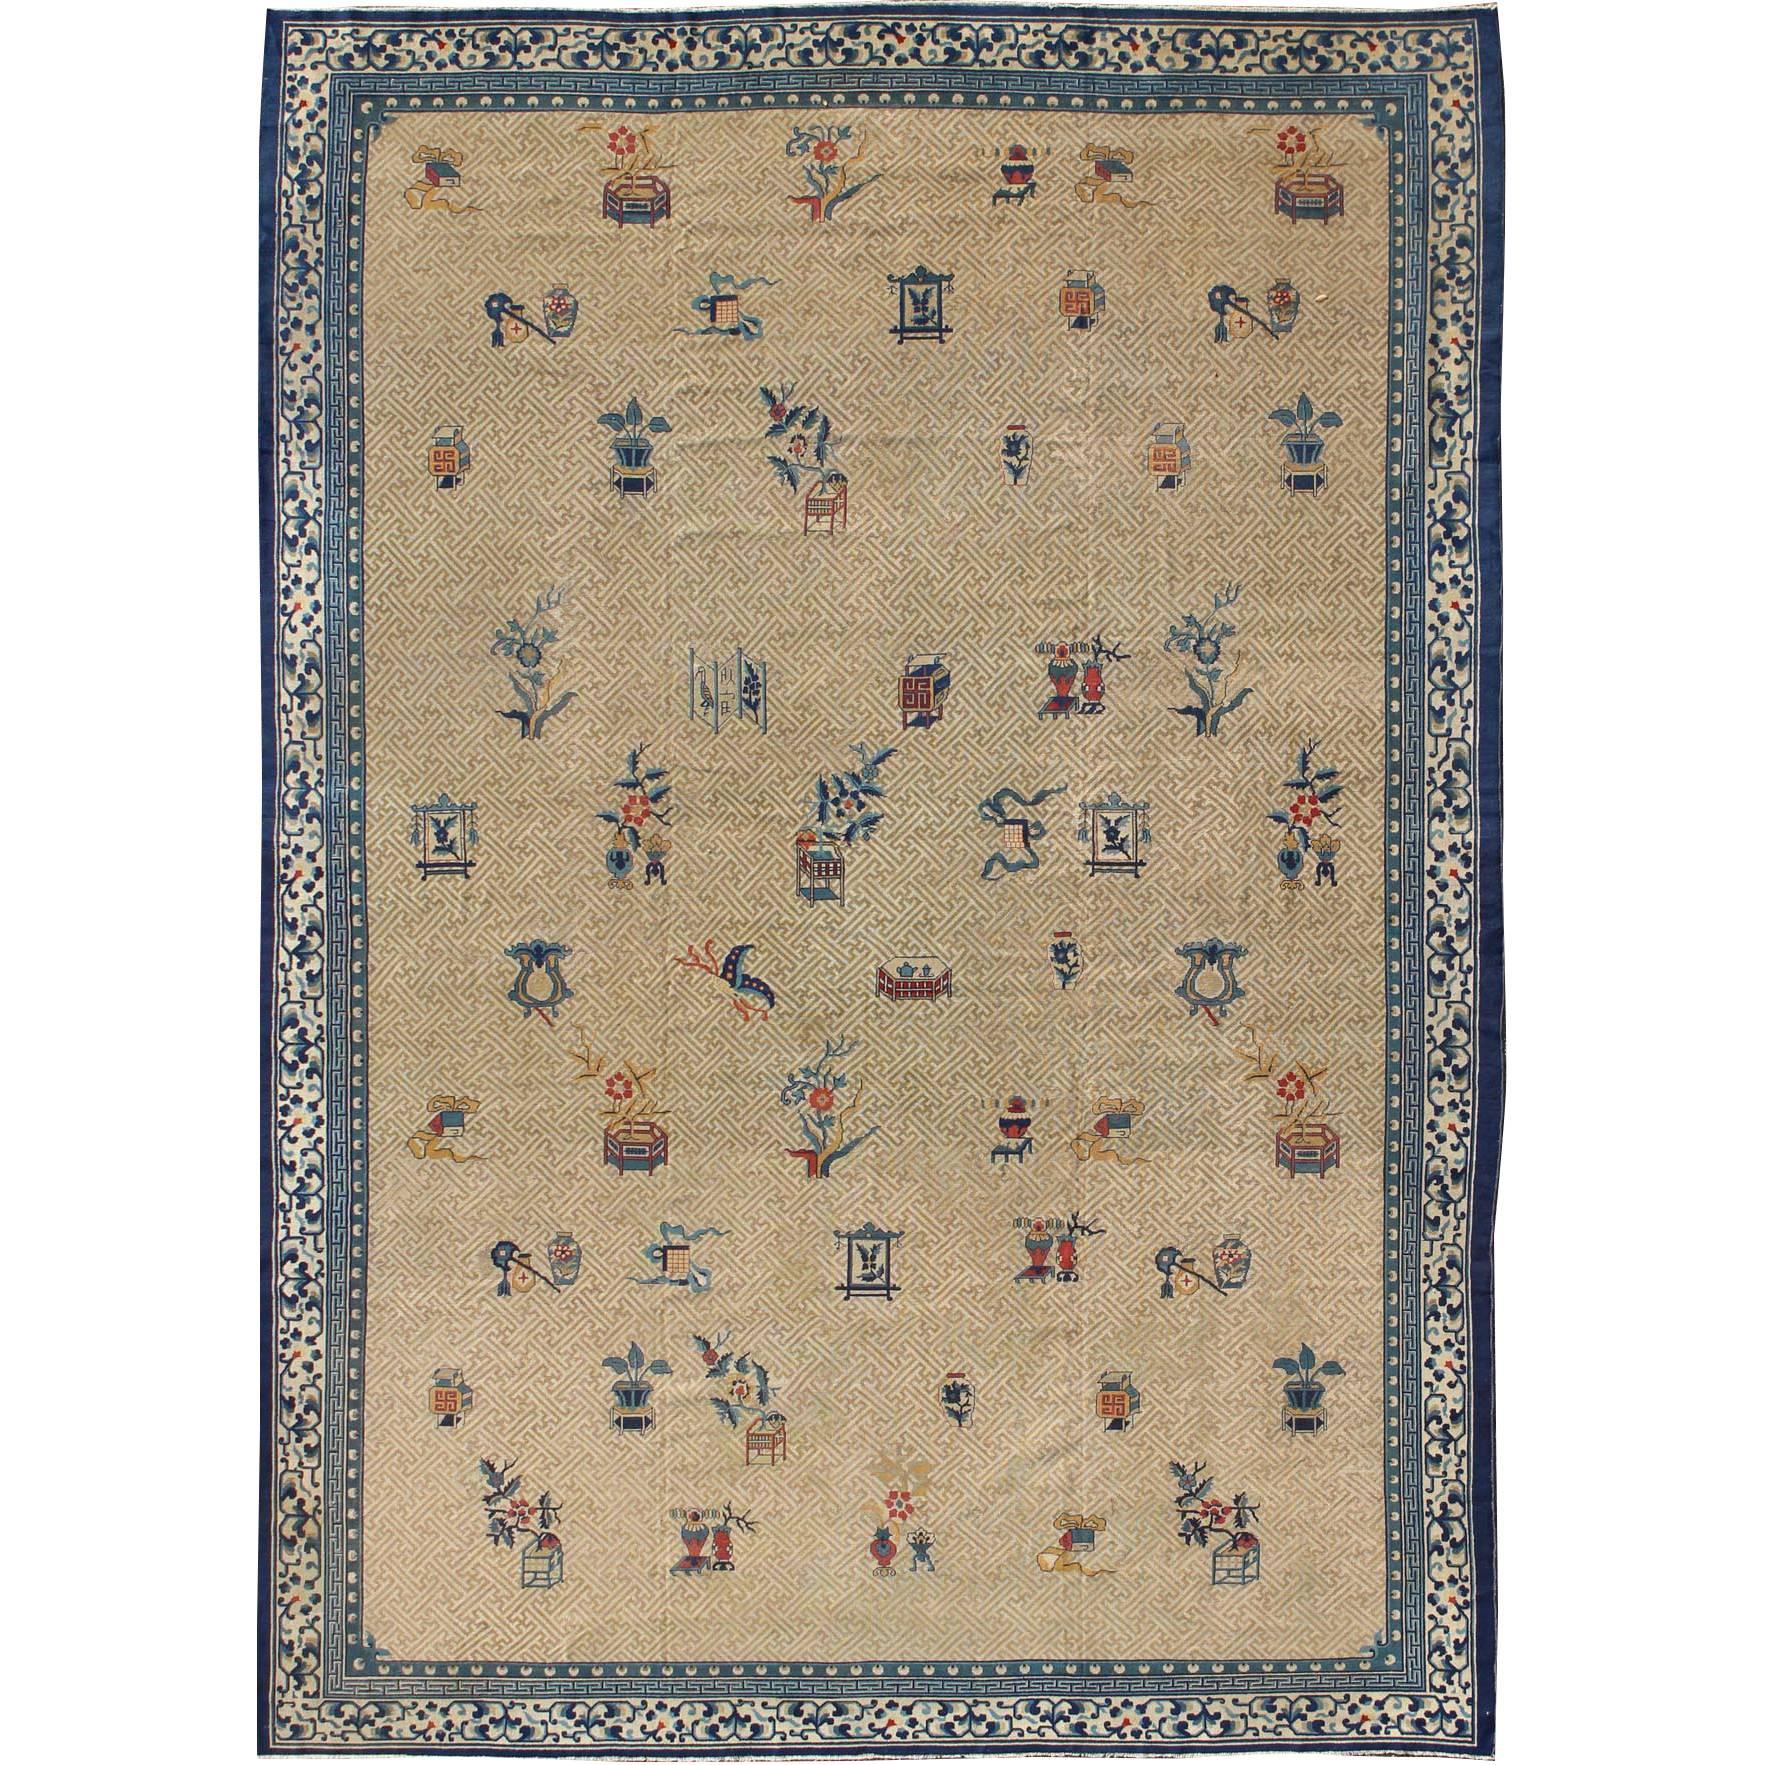 Large Antique Chinese Carpet in Ivory/Taupe Background and Blue Border